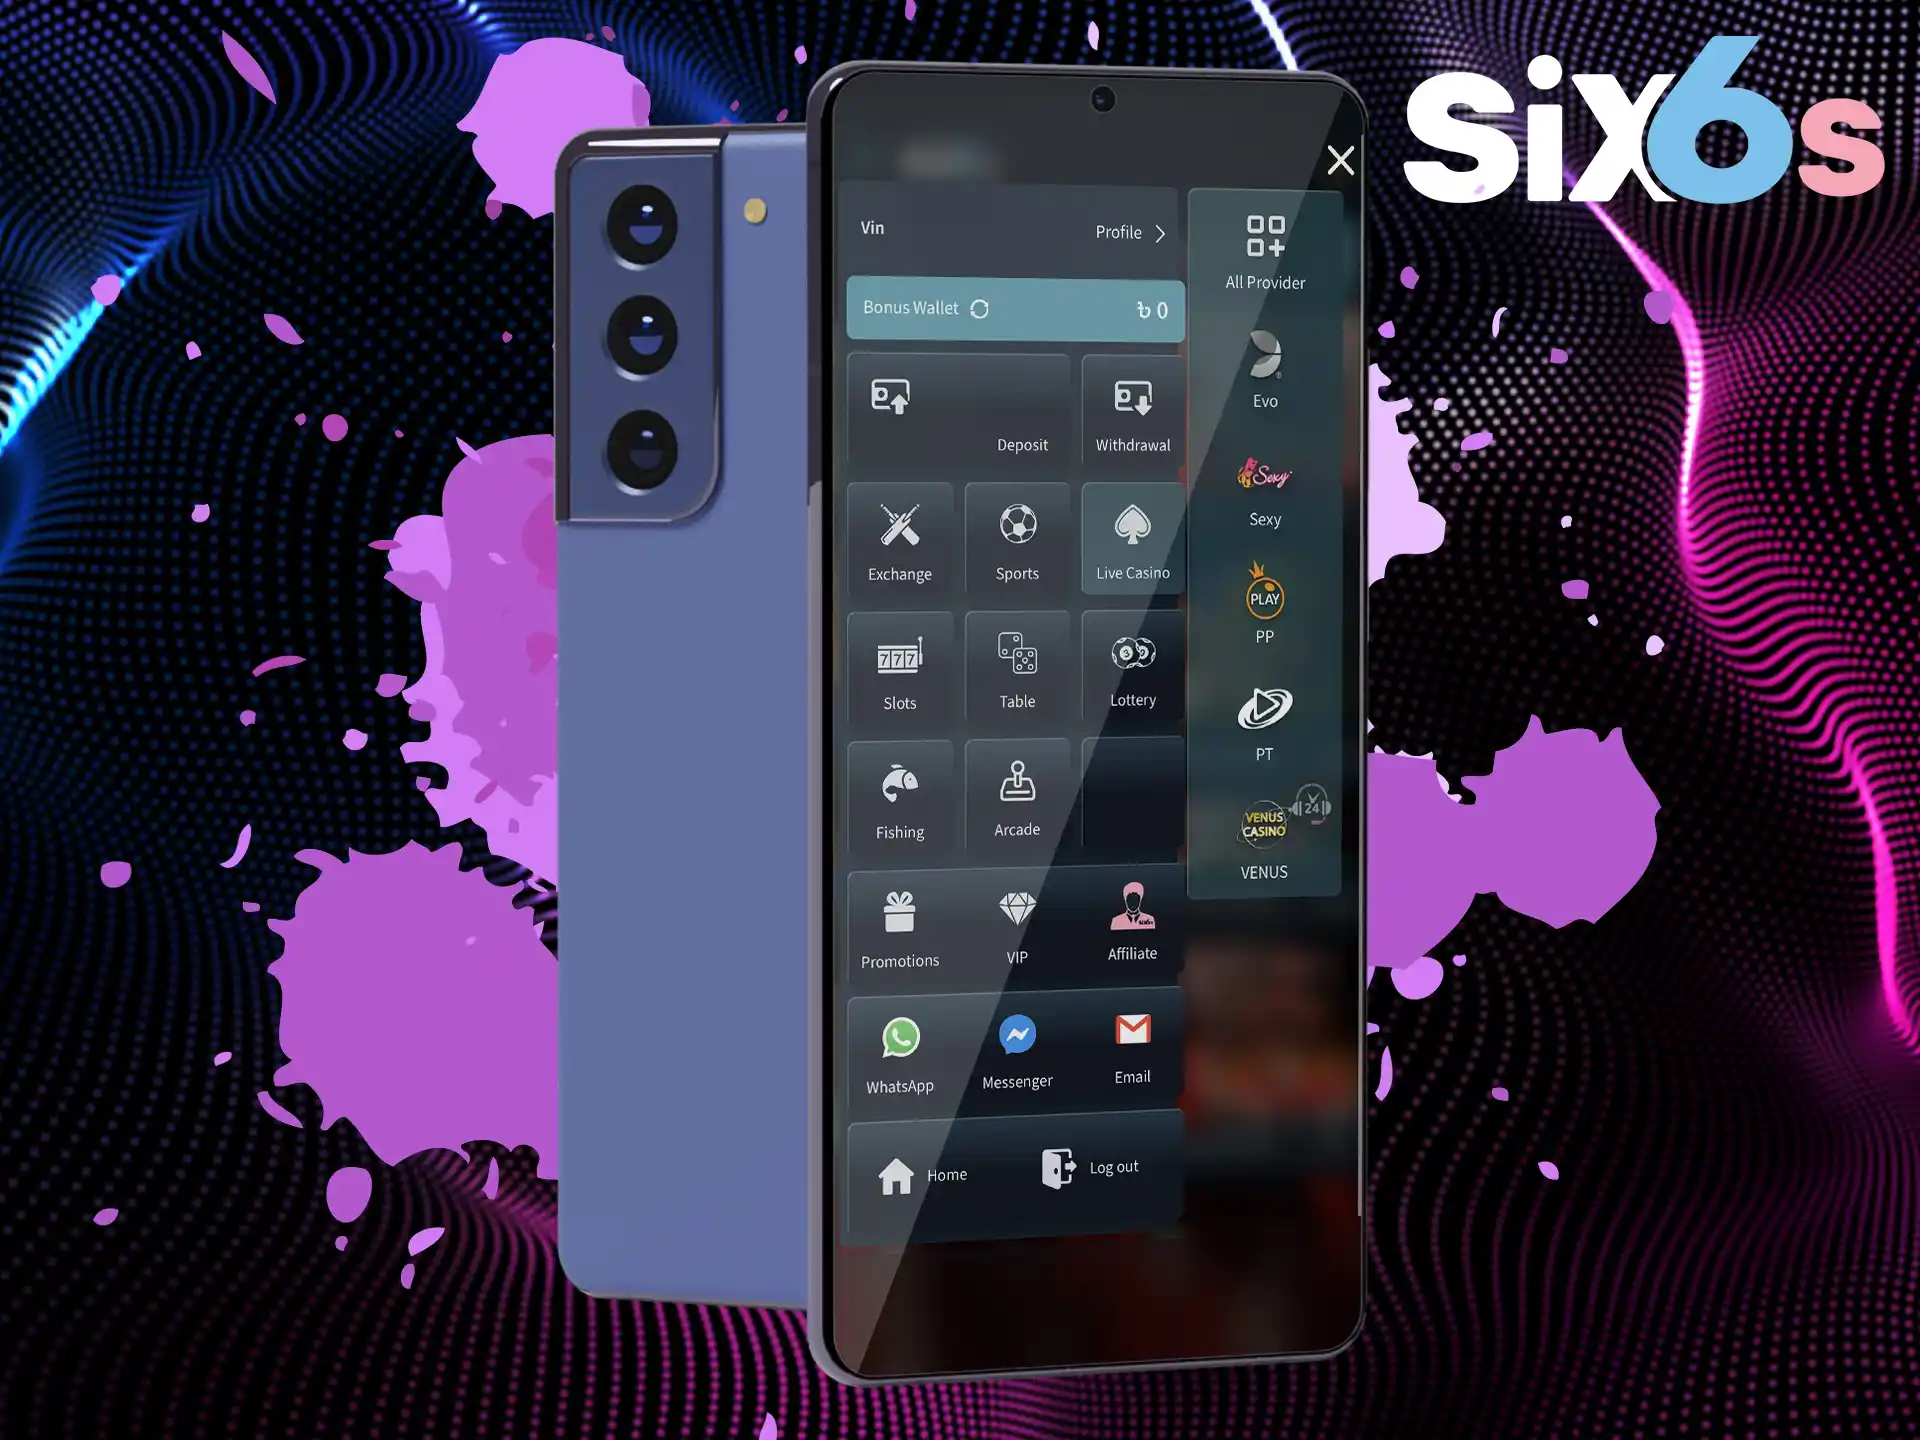 Use the Six6s mobile app for a comfortable experience.